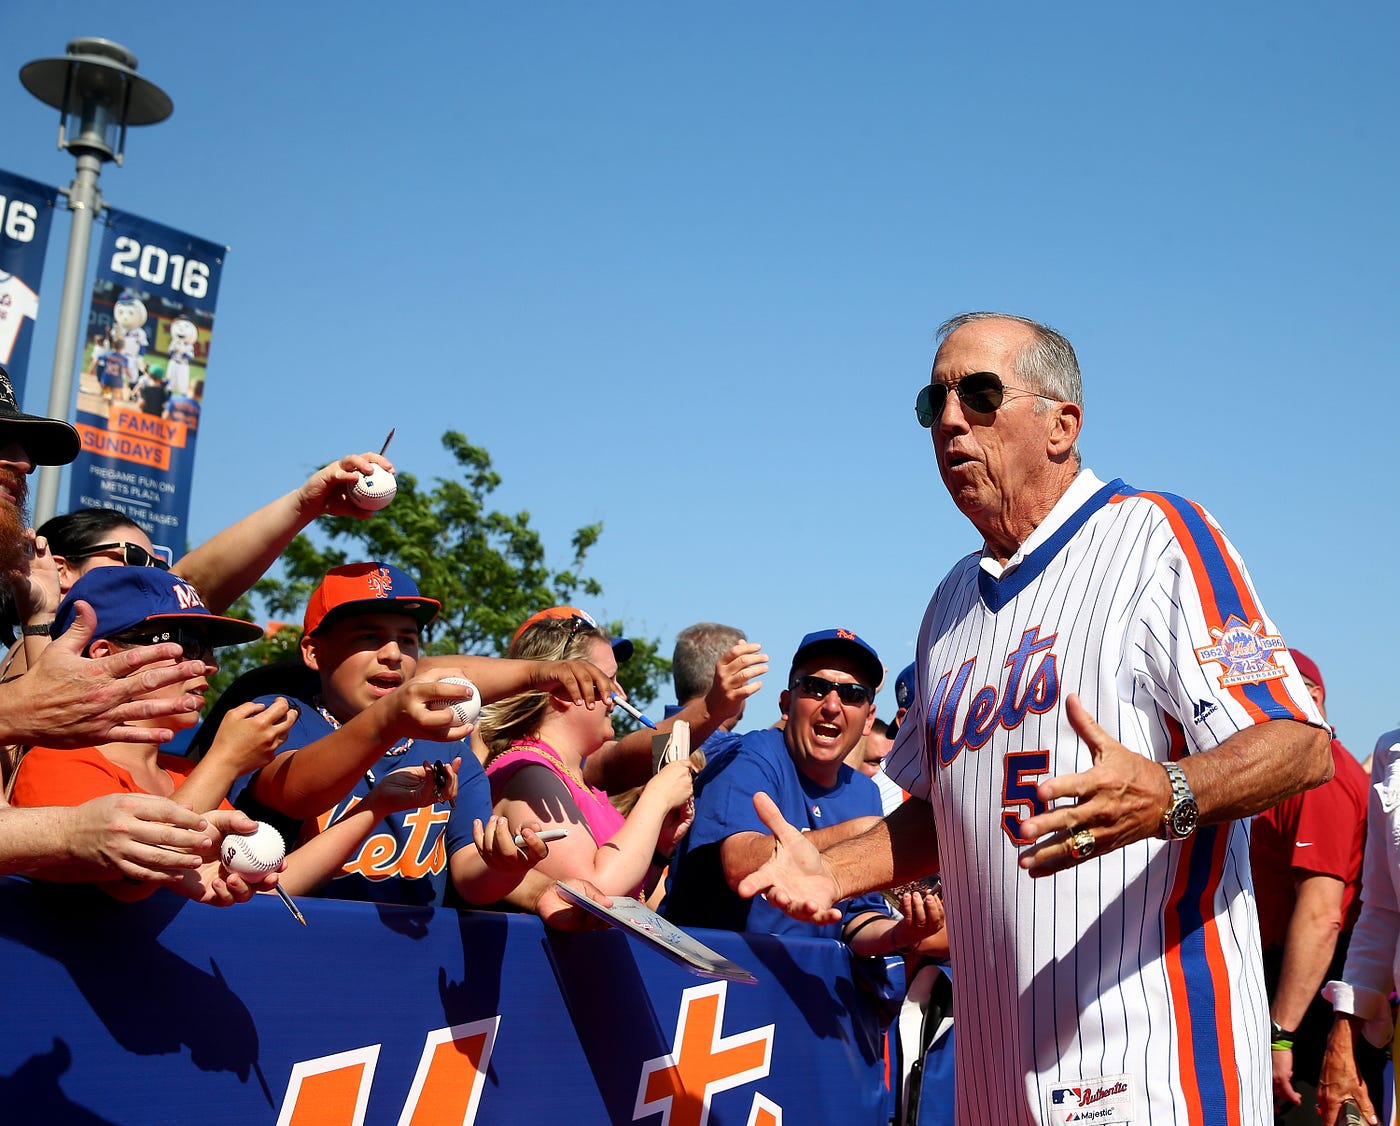 Davey Johnson, Manager Who Led Mets to 1986 World Series Title,  Hospitalized With COVID – NBC New York